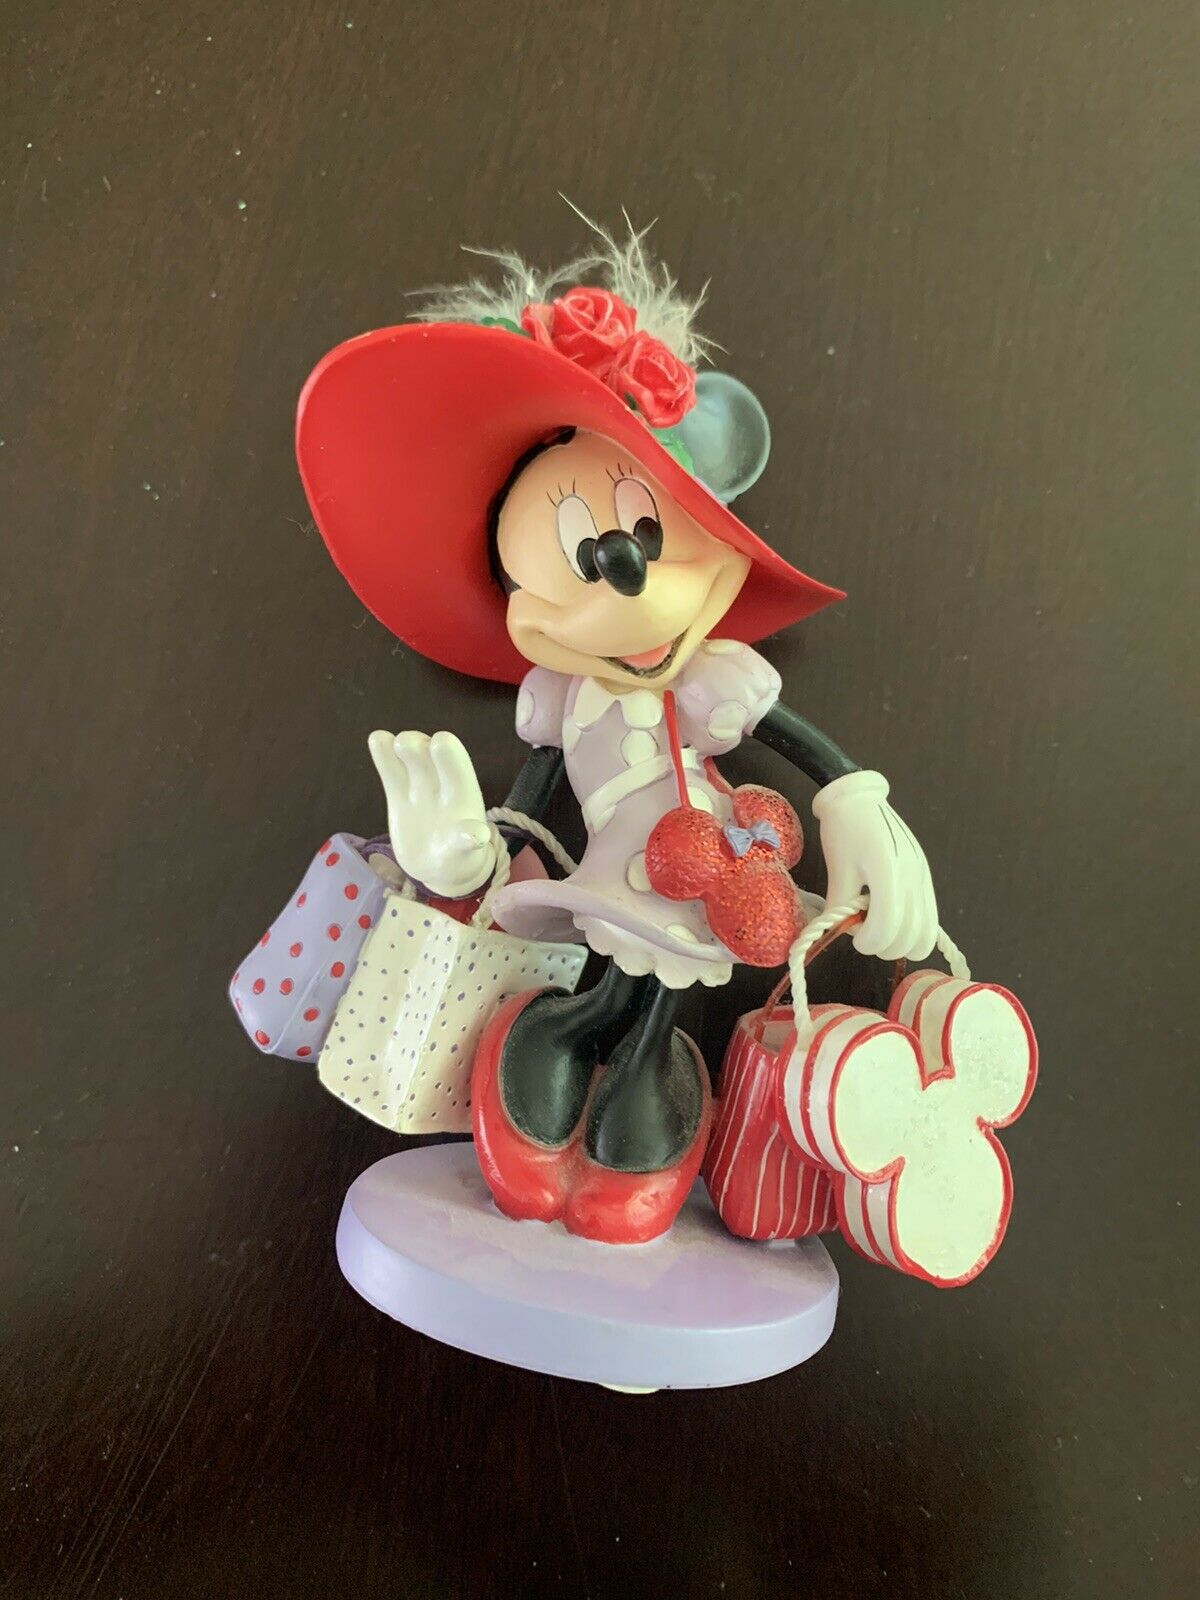 Minnie Mouse Hats Over Heels Hamilton Collection 